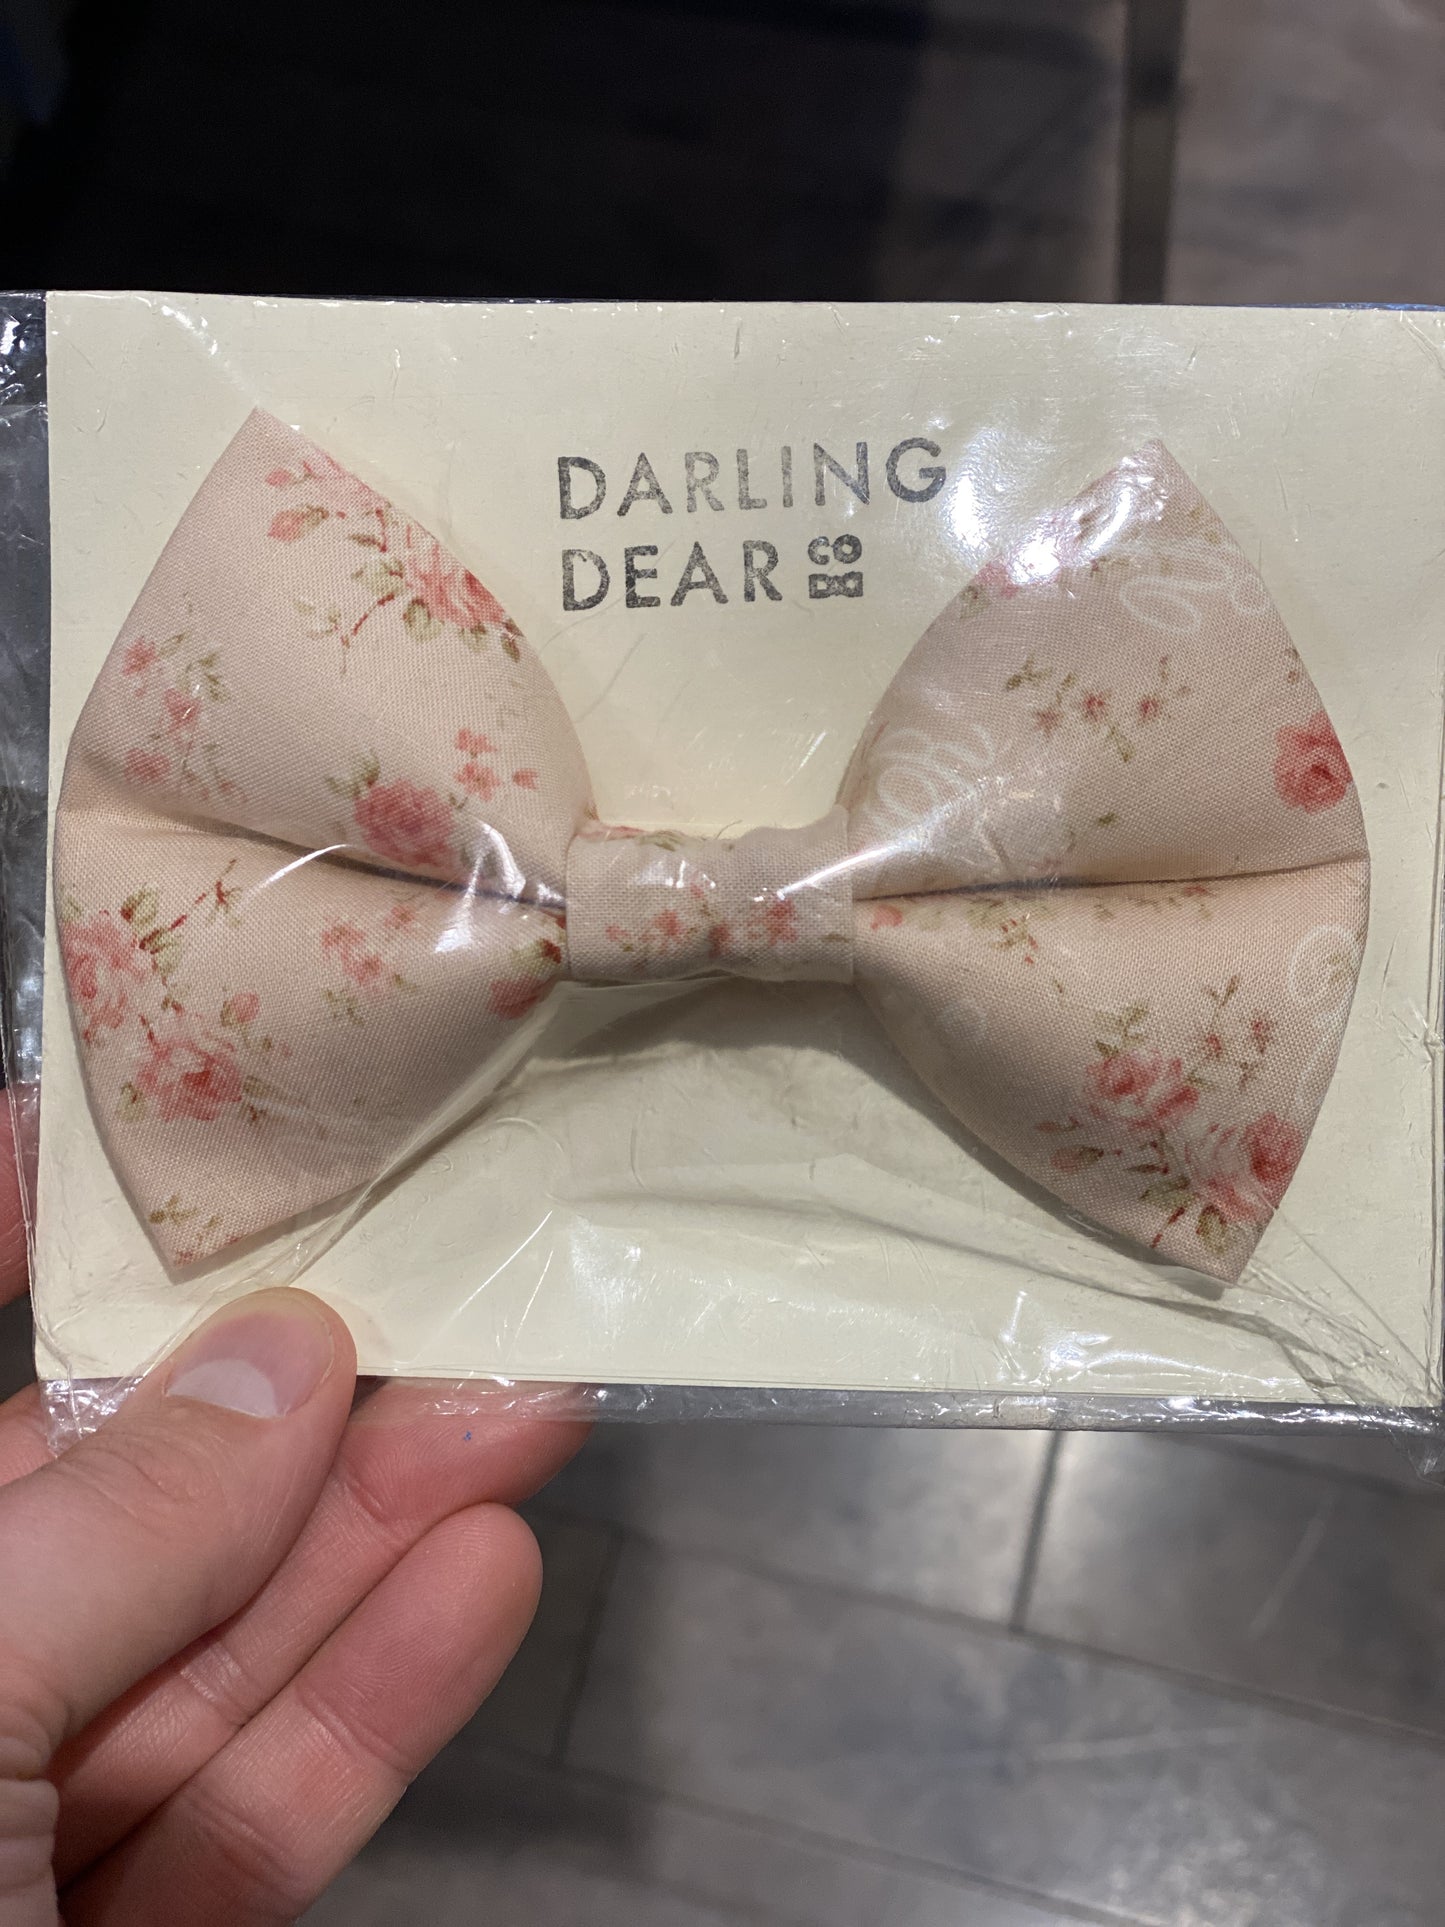 Darling Dear - Pink with pink roses